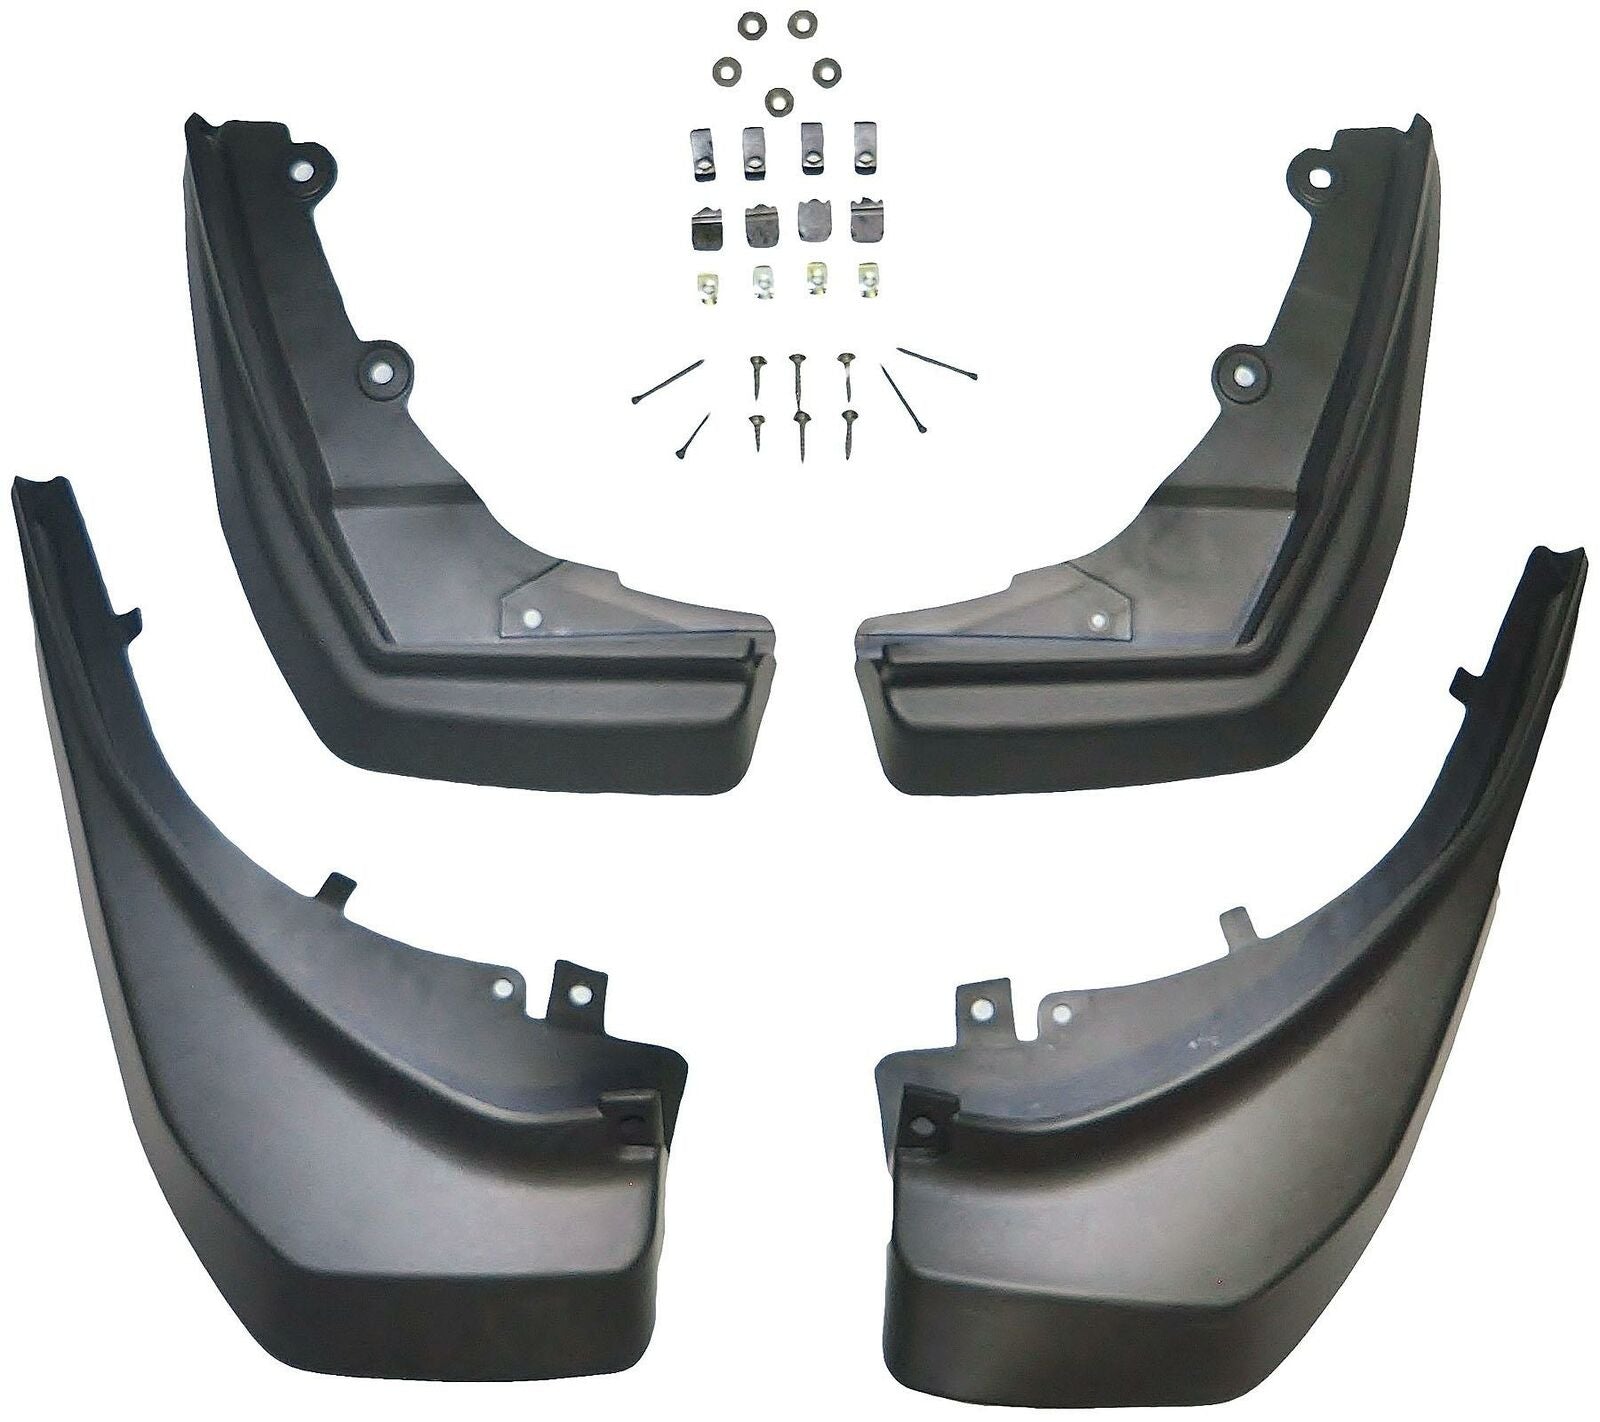 Front & Rear Mud Guards FOR Range Rover Evoque LV 2.2 SD4 [2011-2016]